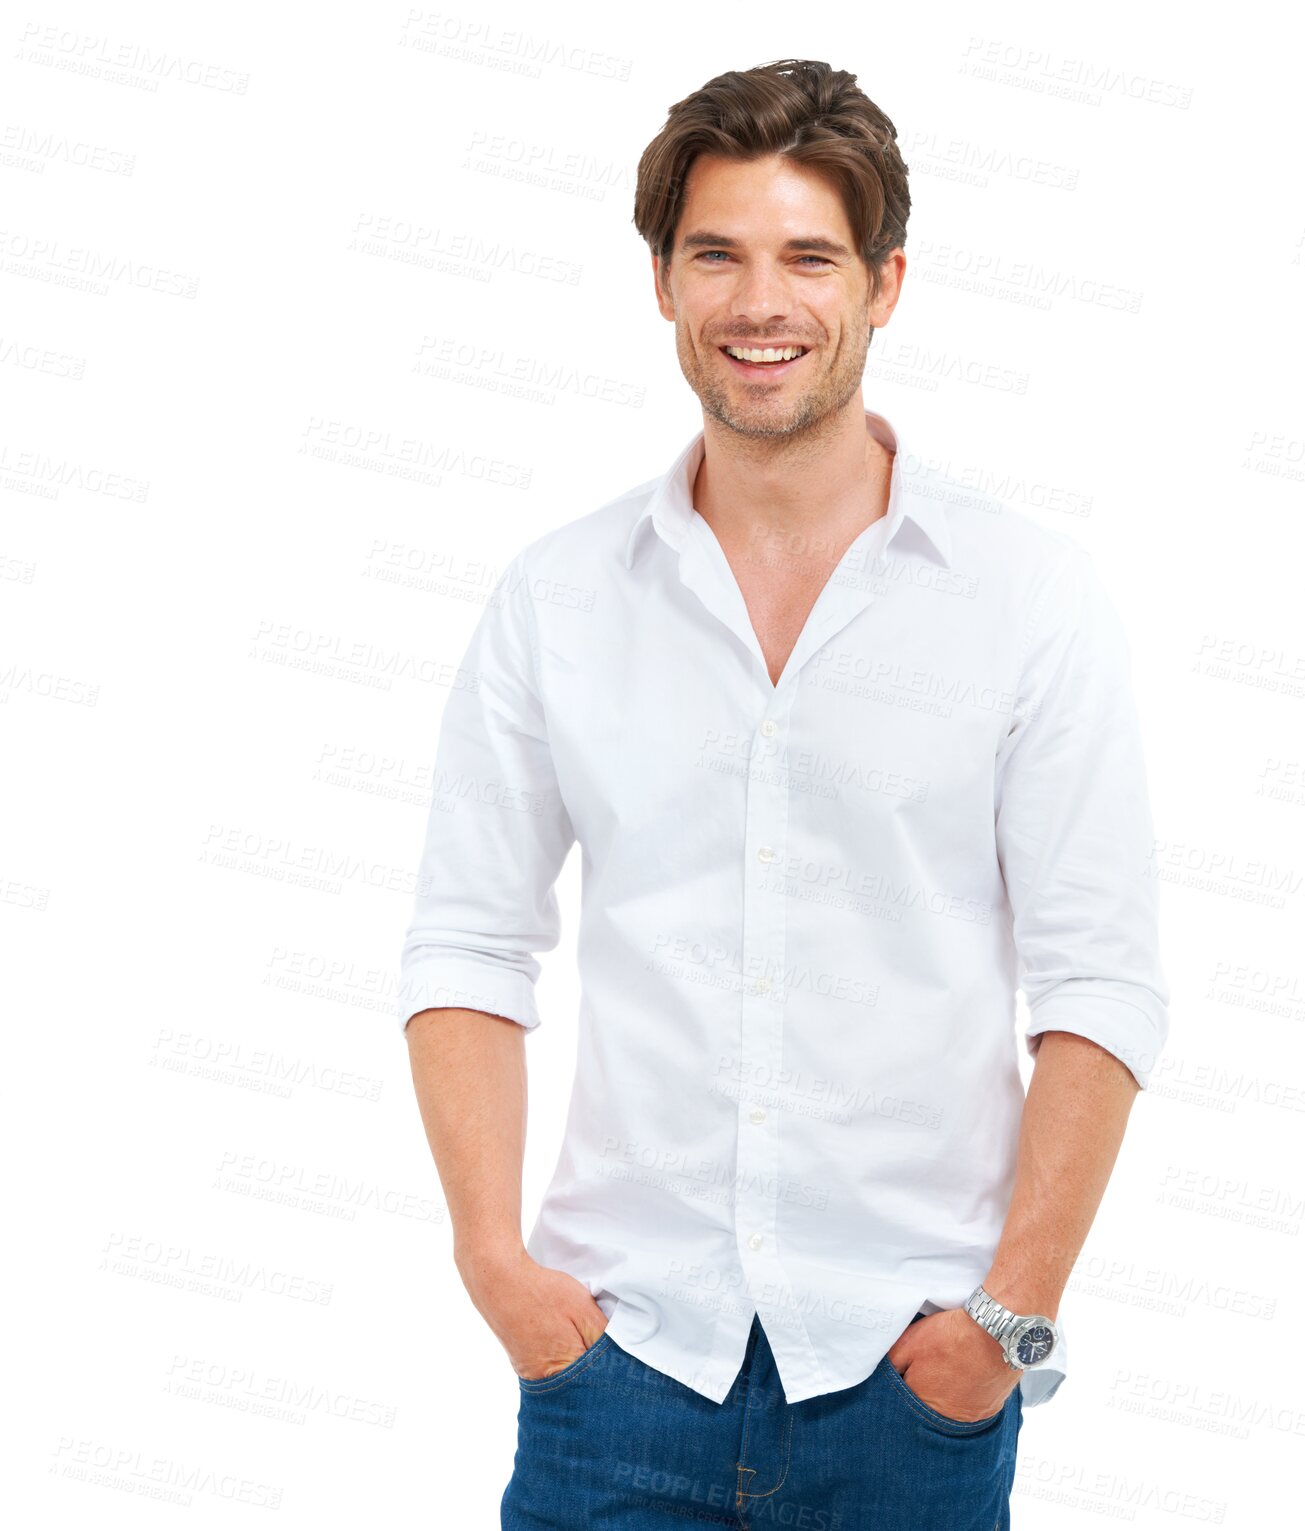 Buy stock photo Handsome, young and man with casual fashion, apparel and luxury classy white shirt and jeans. Natural happy male and portrait of model with trendy clothes isolated on a transparent png background